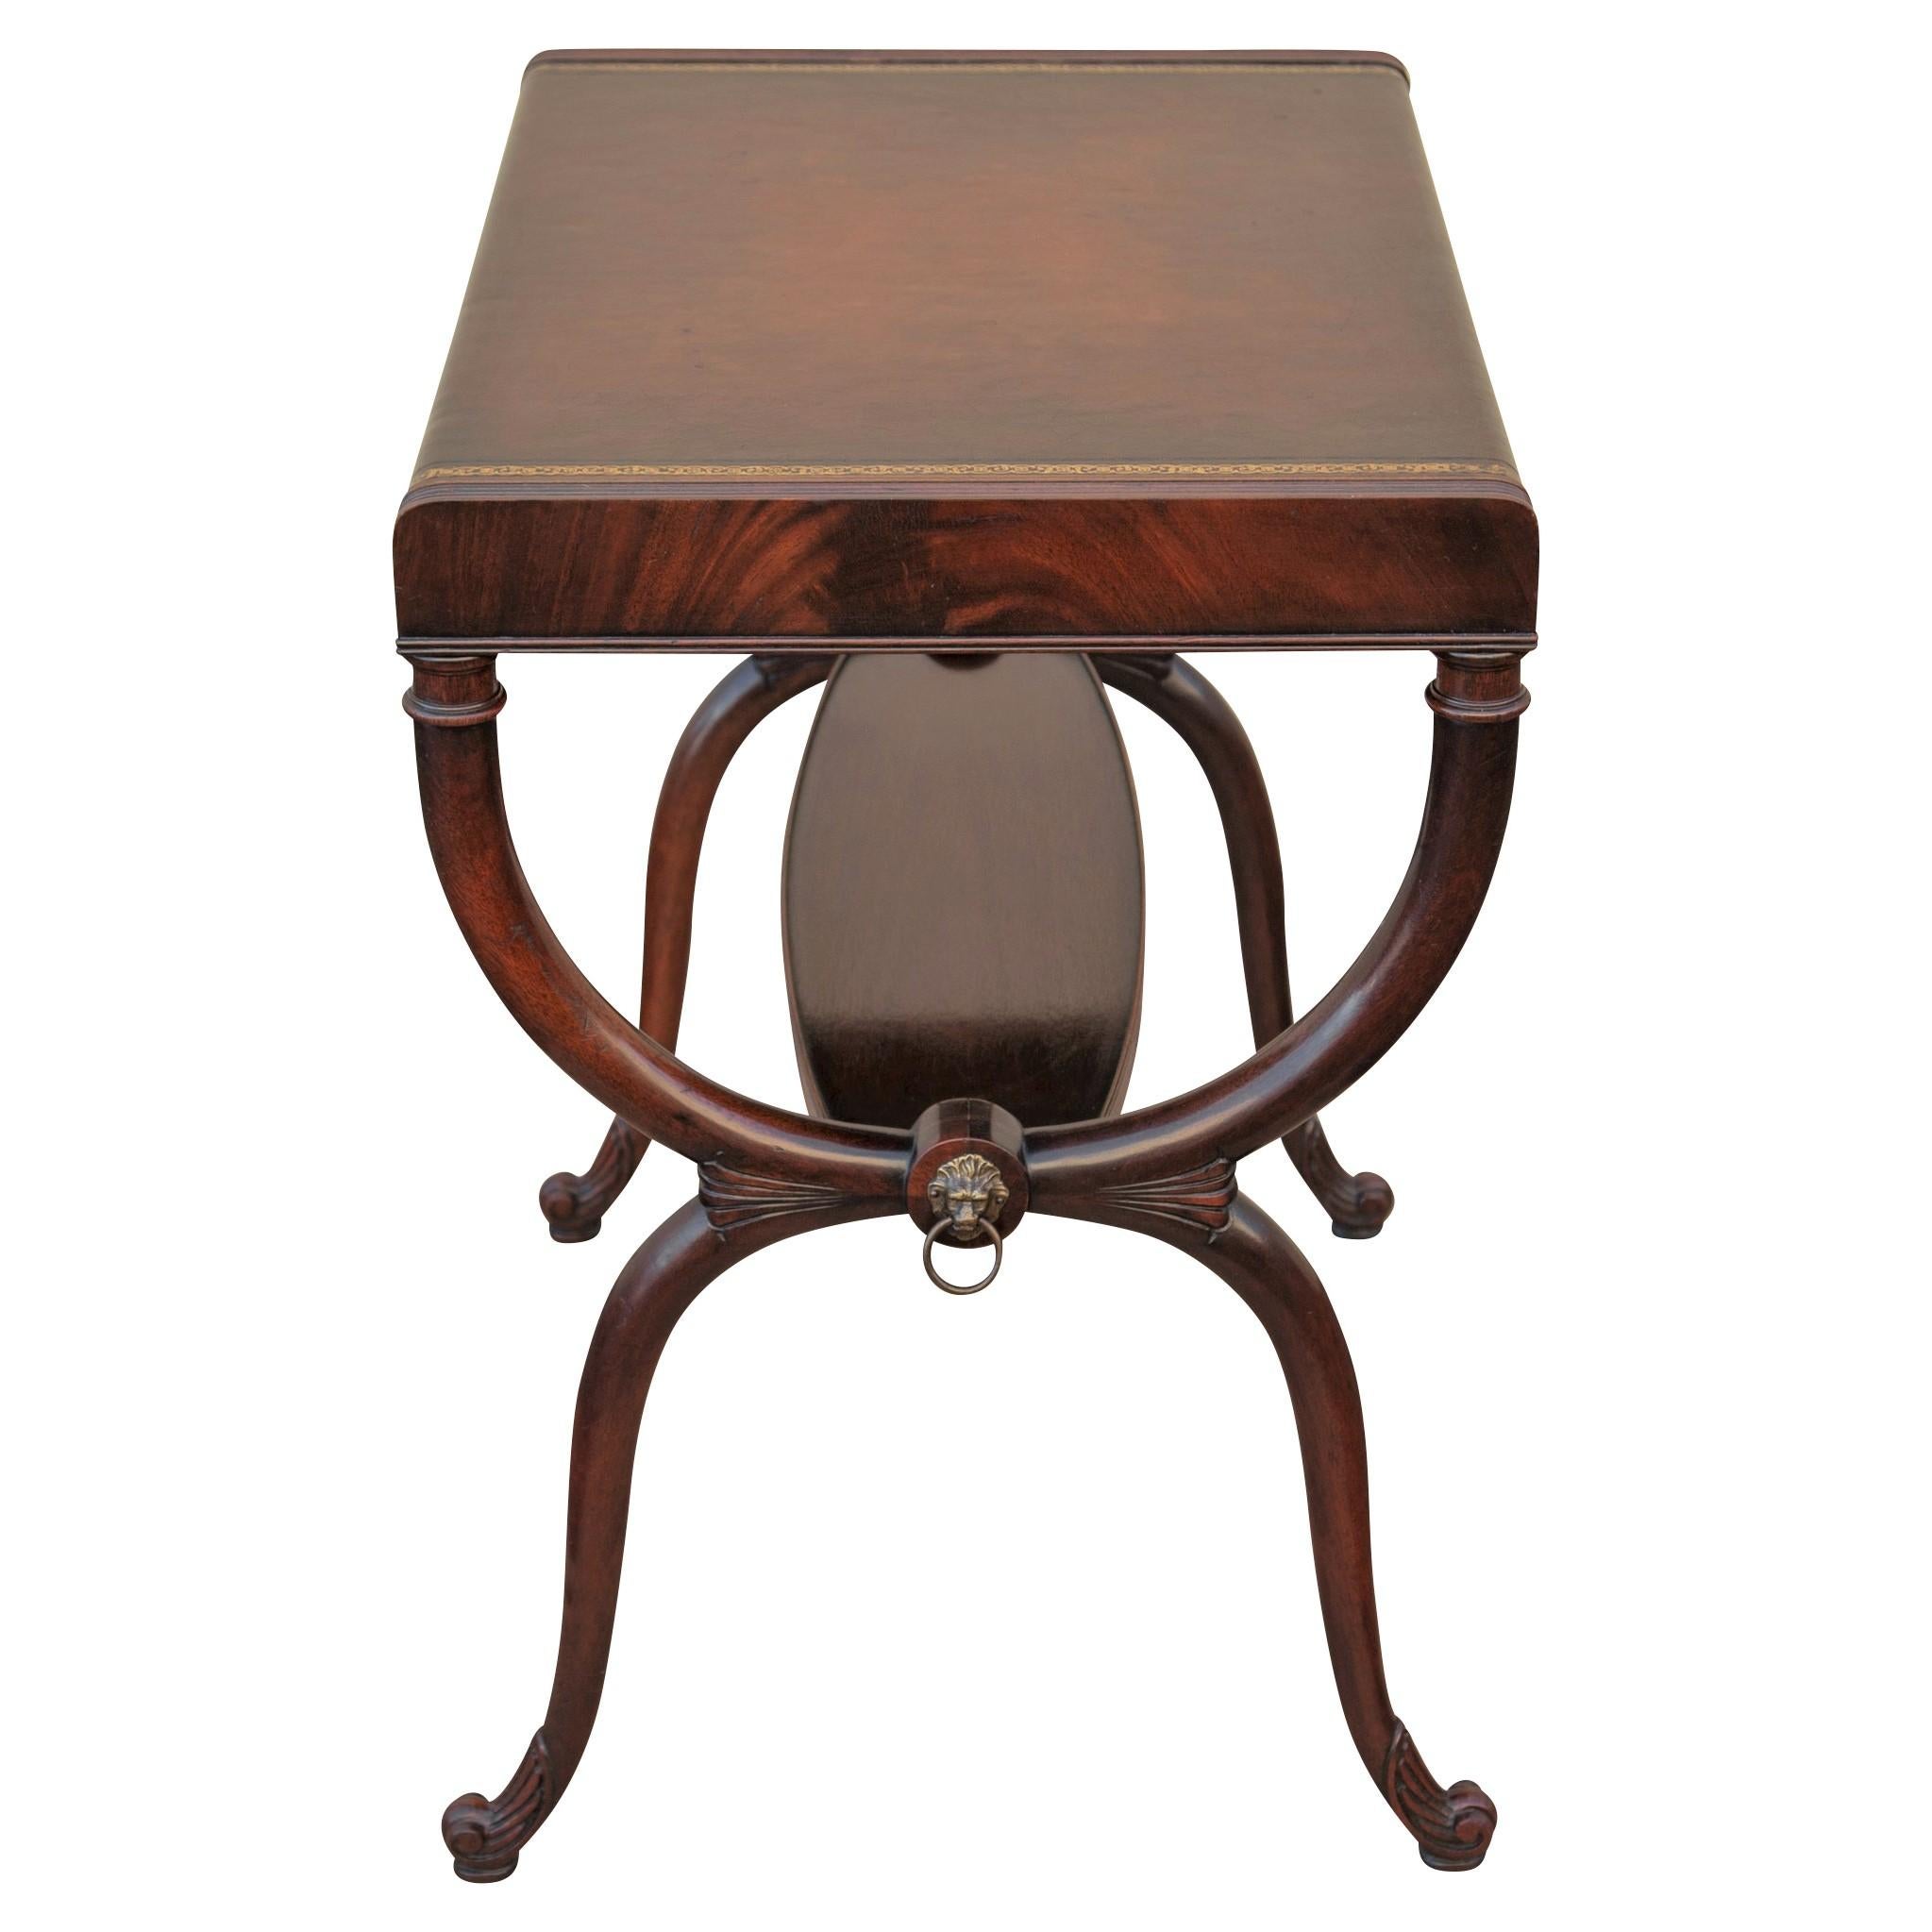 Carved Regency Leather Top Mahogany Side Table with Curule Legs